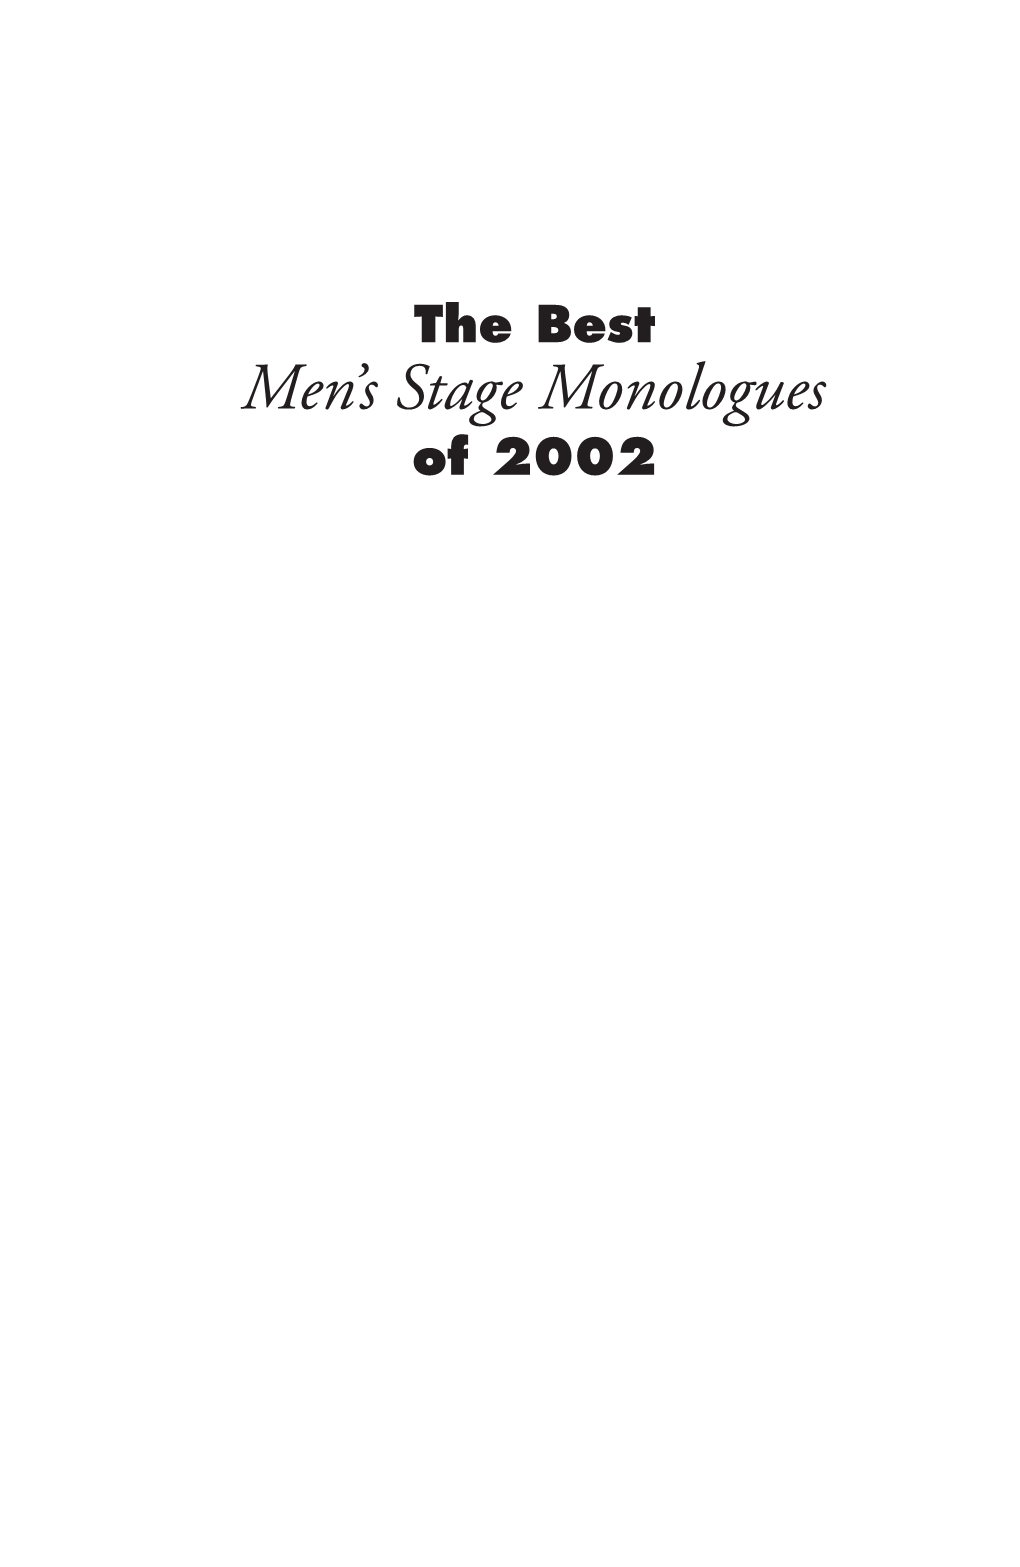 Men's Stage Monologues